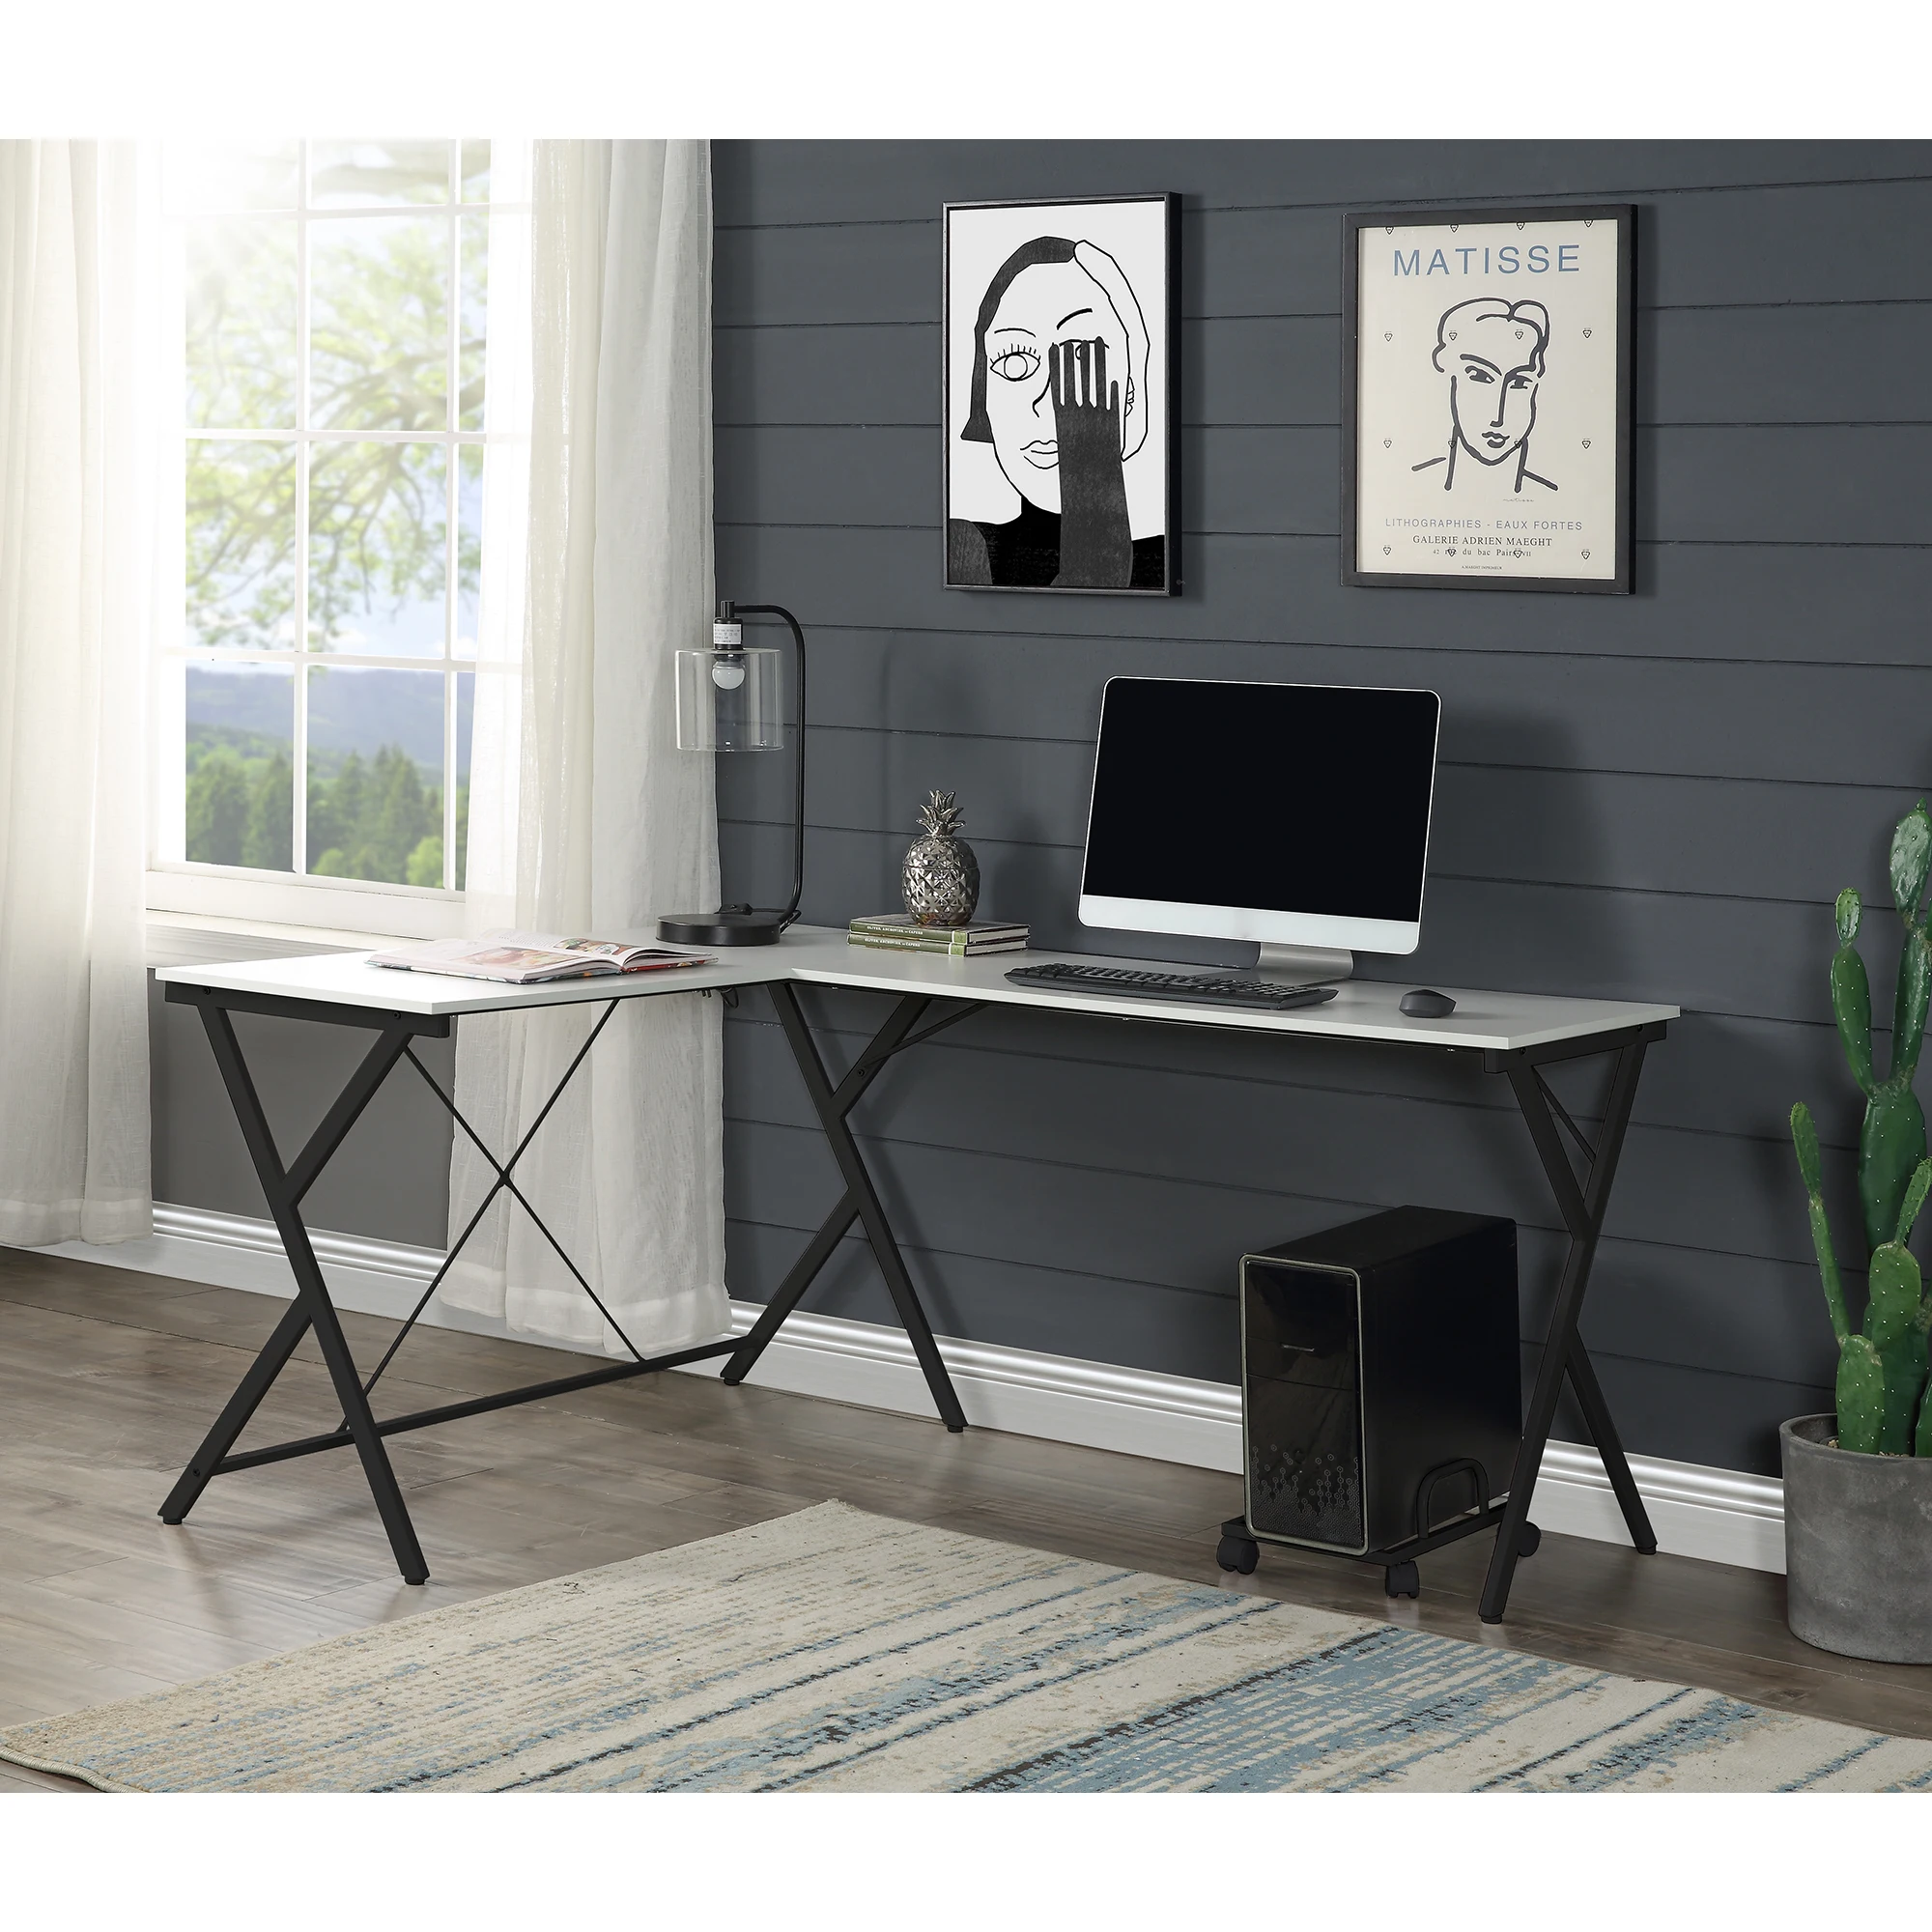 [Flash Sale]Dazenus Corner Computer Desk L-Shaped Office Game Table in White/Black Finish Ideal for Office Study & Game[US-W] acme comet full bed frame white finish